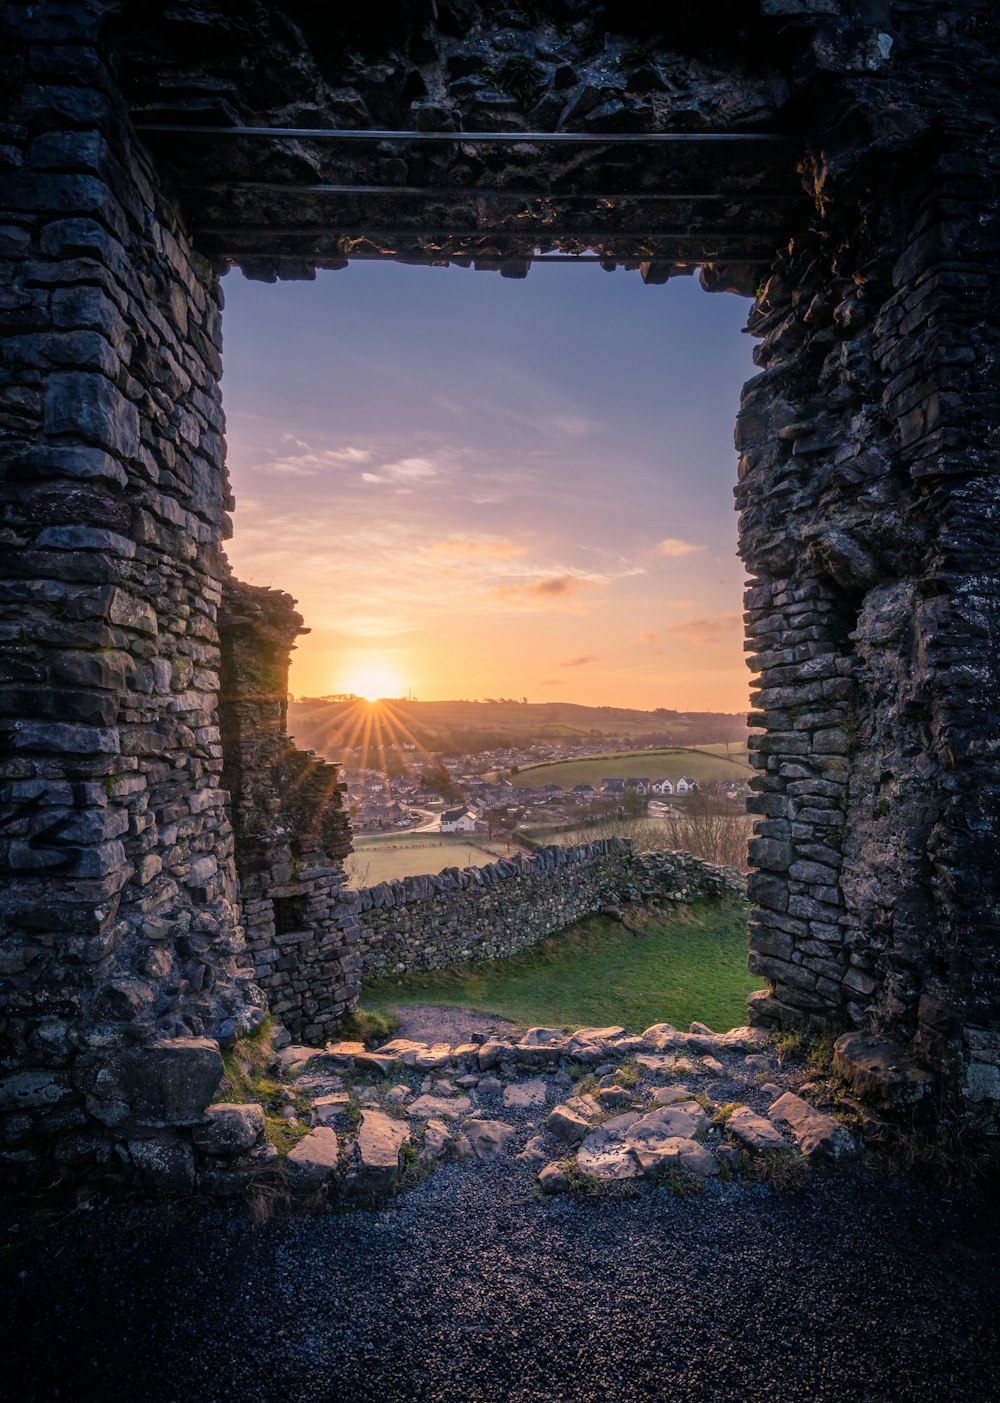 the sun is setting through a window in a stone structure